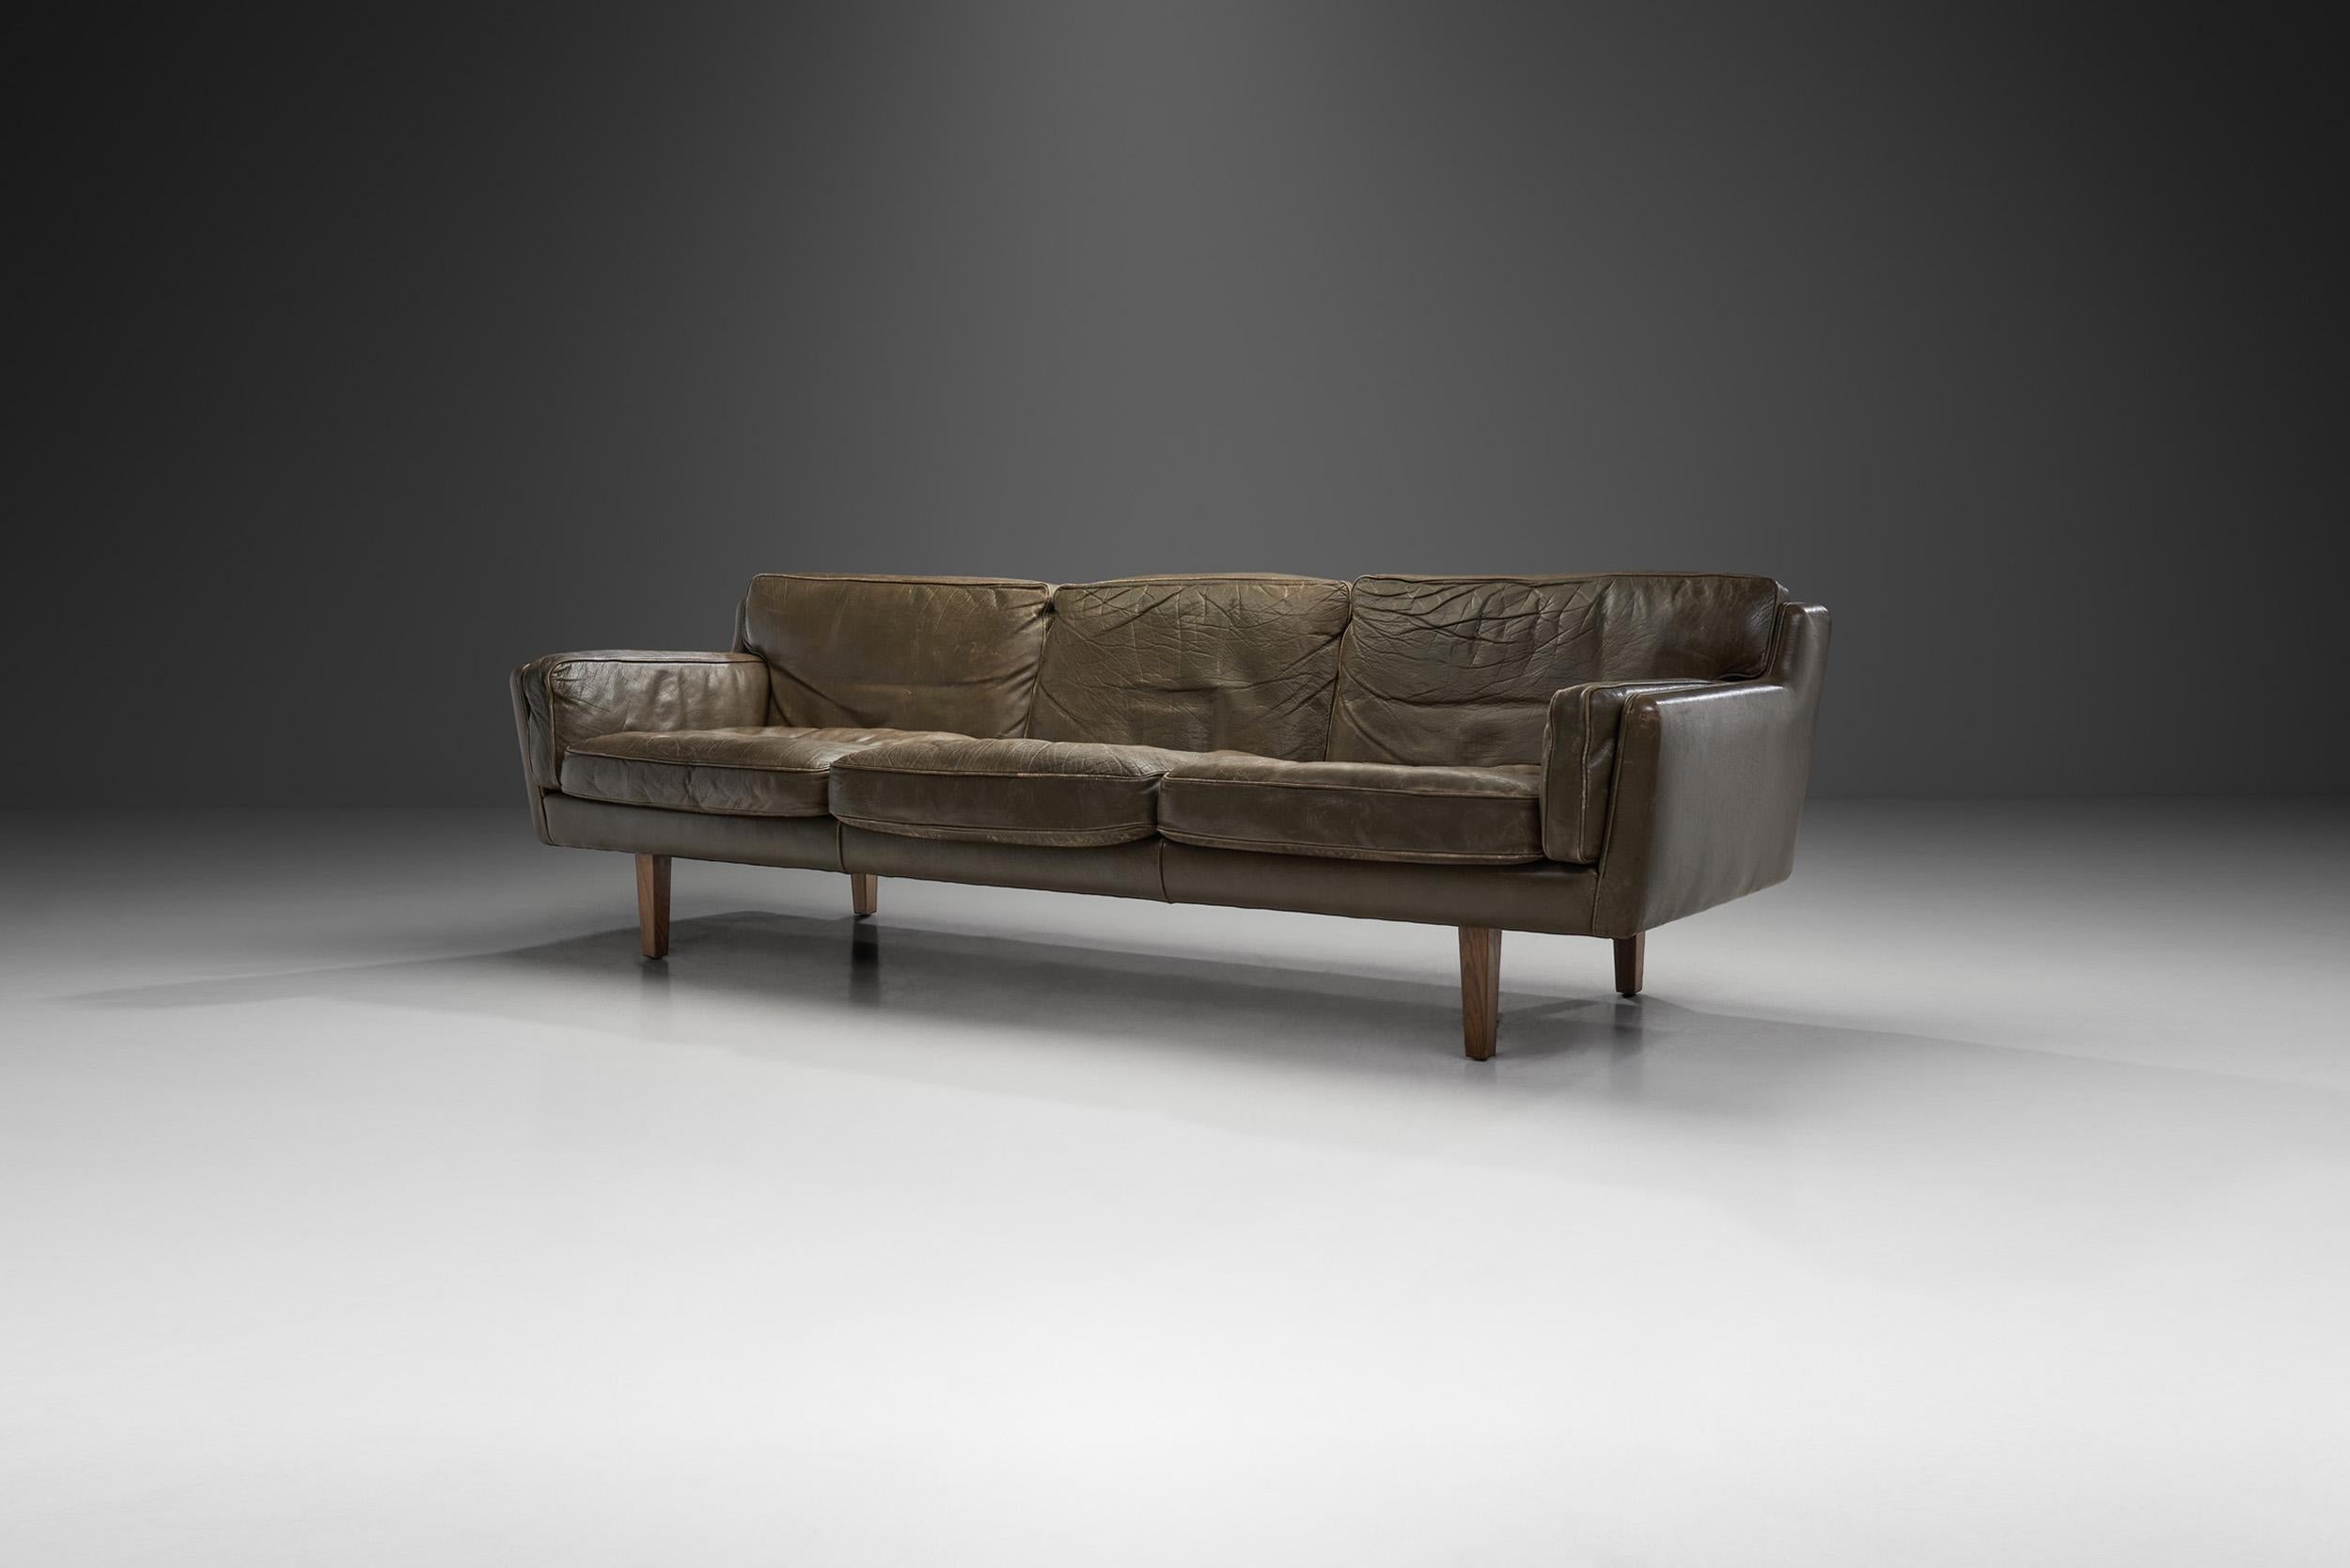 This freestanding sofa, better known as “Model V11” is considered among the masterpiece designs of Illum Wikkelsø. The Danish designer created the “V11” series in 1965 whilst working with master cabinetmaker Holger Christiansen in